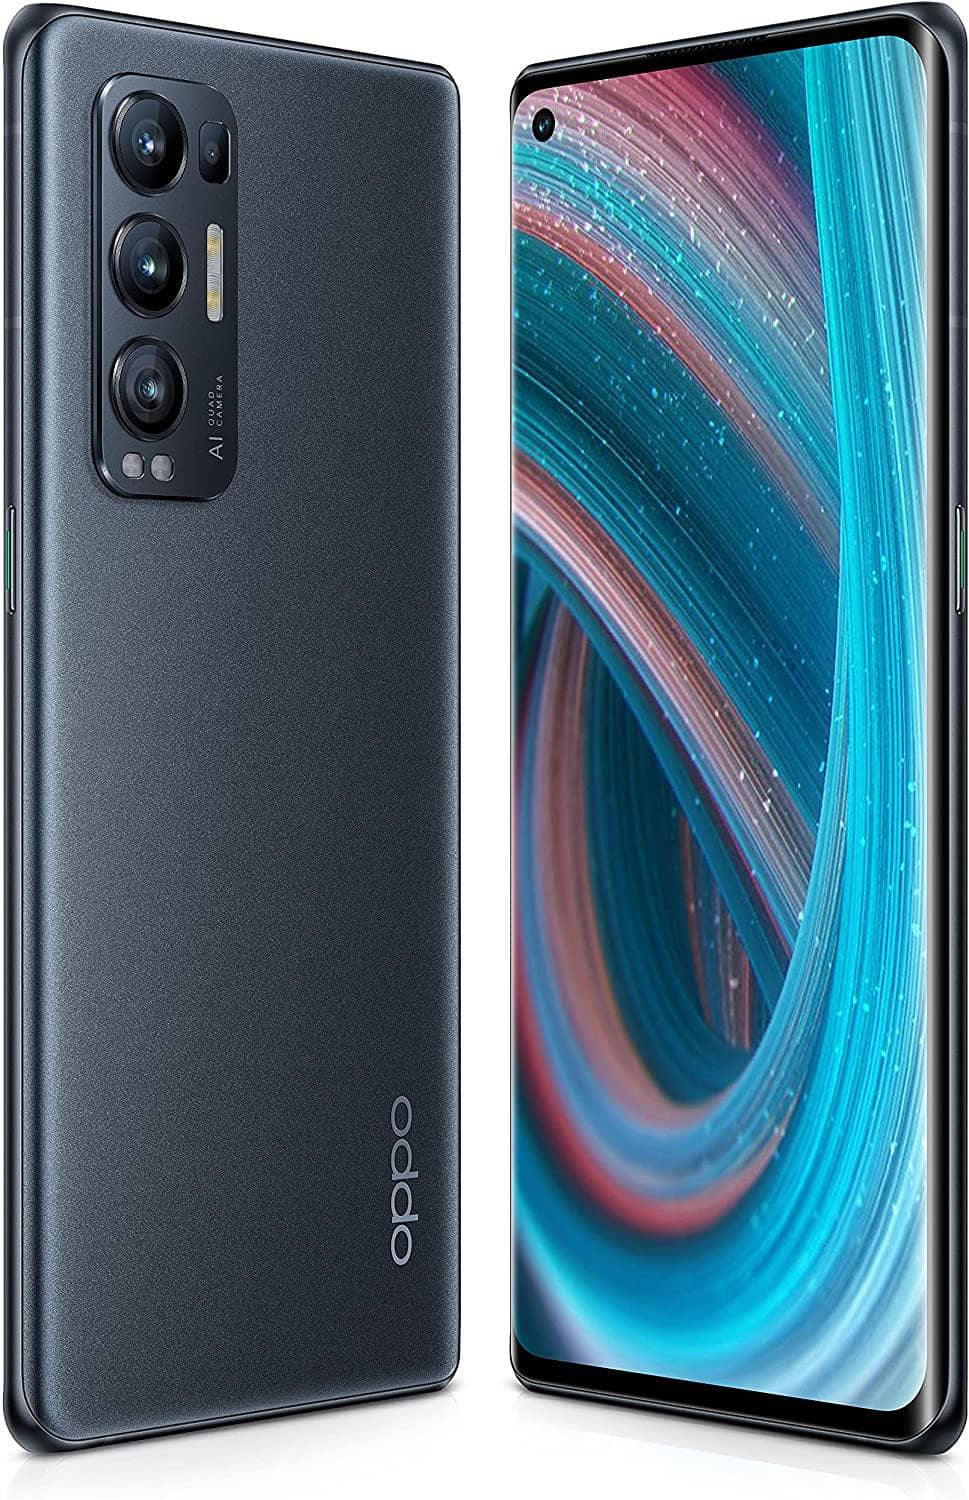 OPPO Reno5 Pro 5G Dual SIM Smartphone with OPPO Speaker 256GB 12GB RAM 65W SuperVOOC 50MP AI Quad Camera 4K AI Highlight Video Fingerprint and Face Recognition 5G Mobile Phone Galactic Silver - DealYaSteal